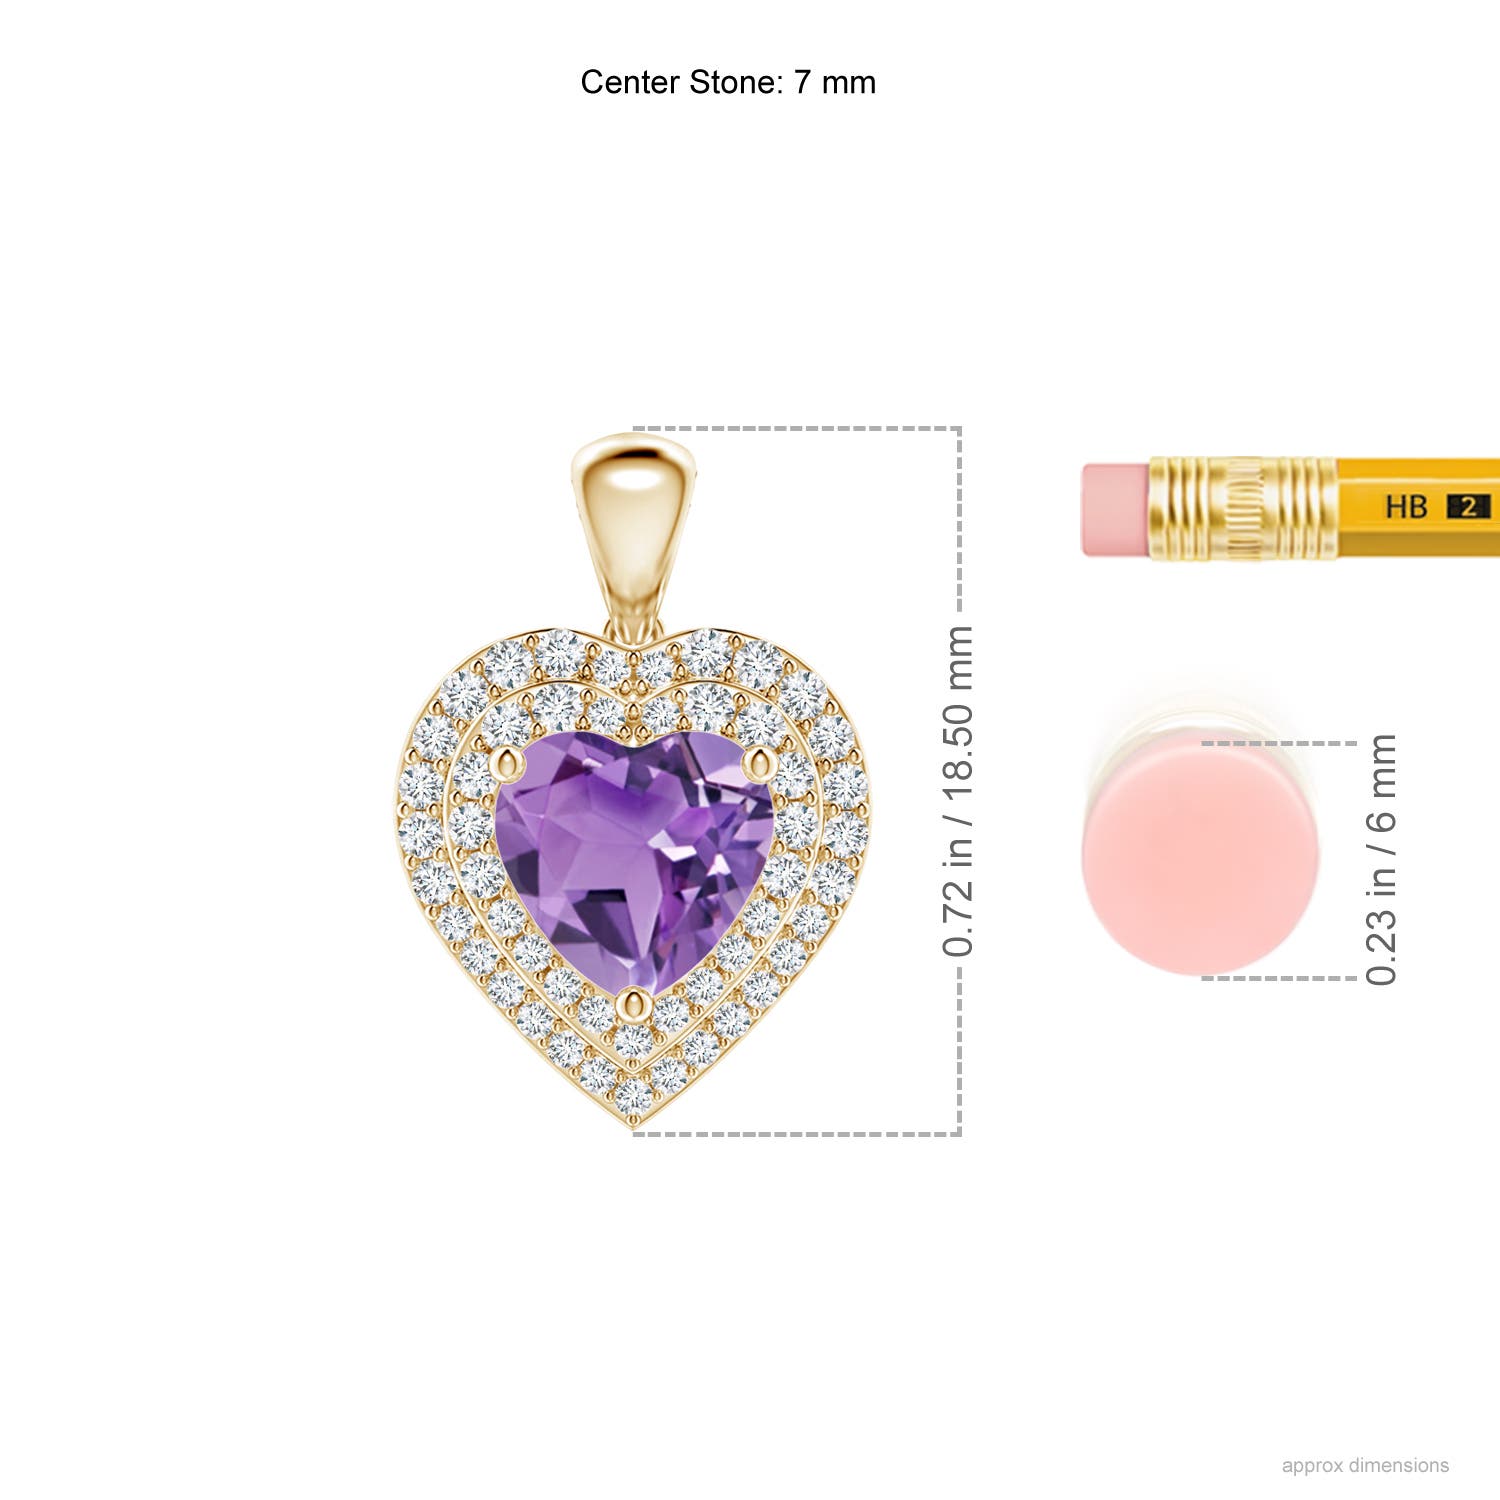 A - Amethyst / 1.53 CT / 14 KT Yellow Gold